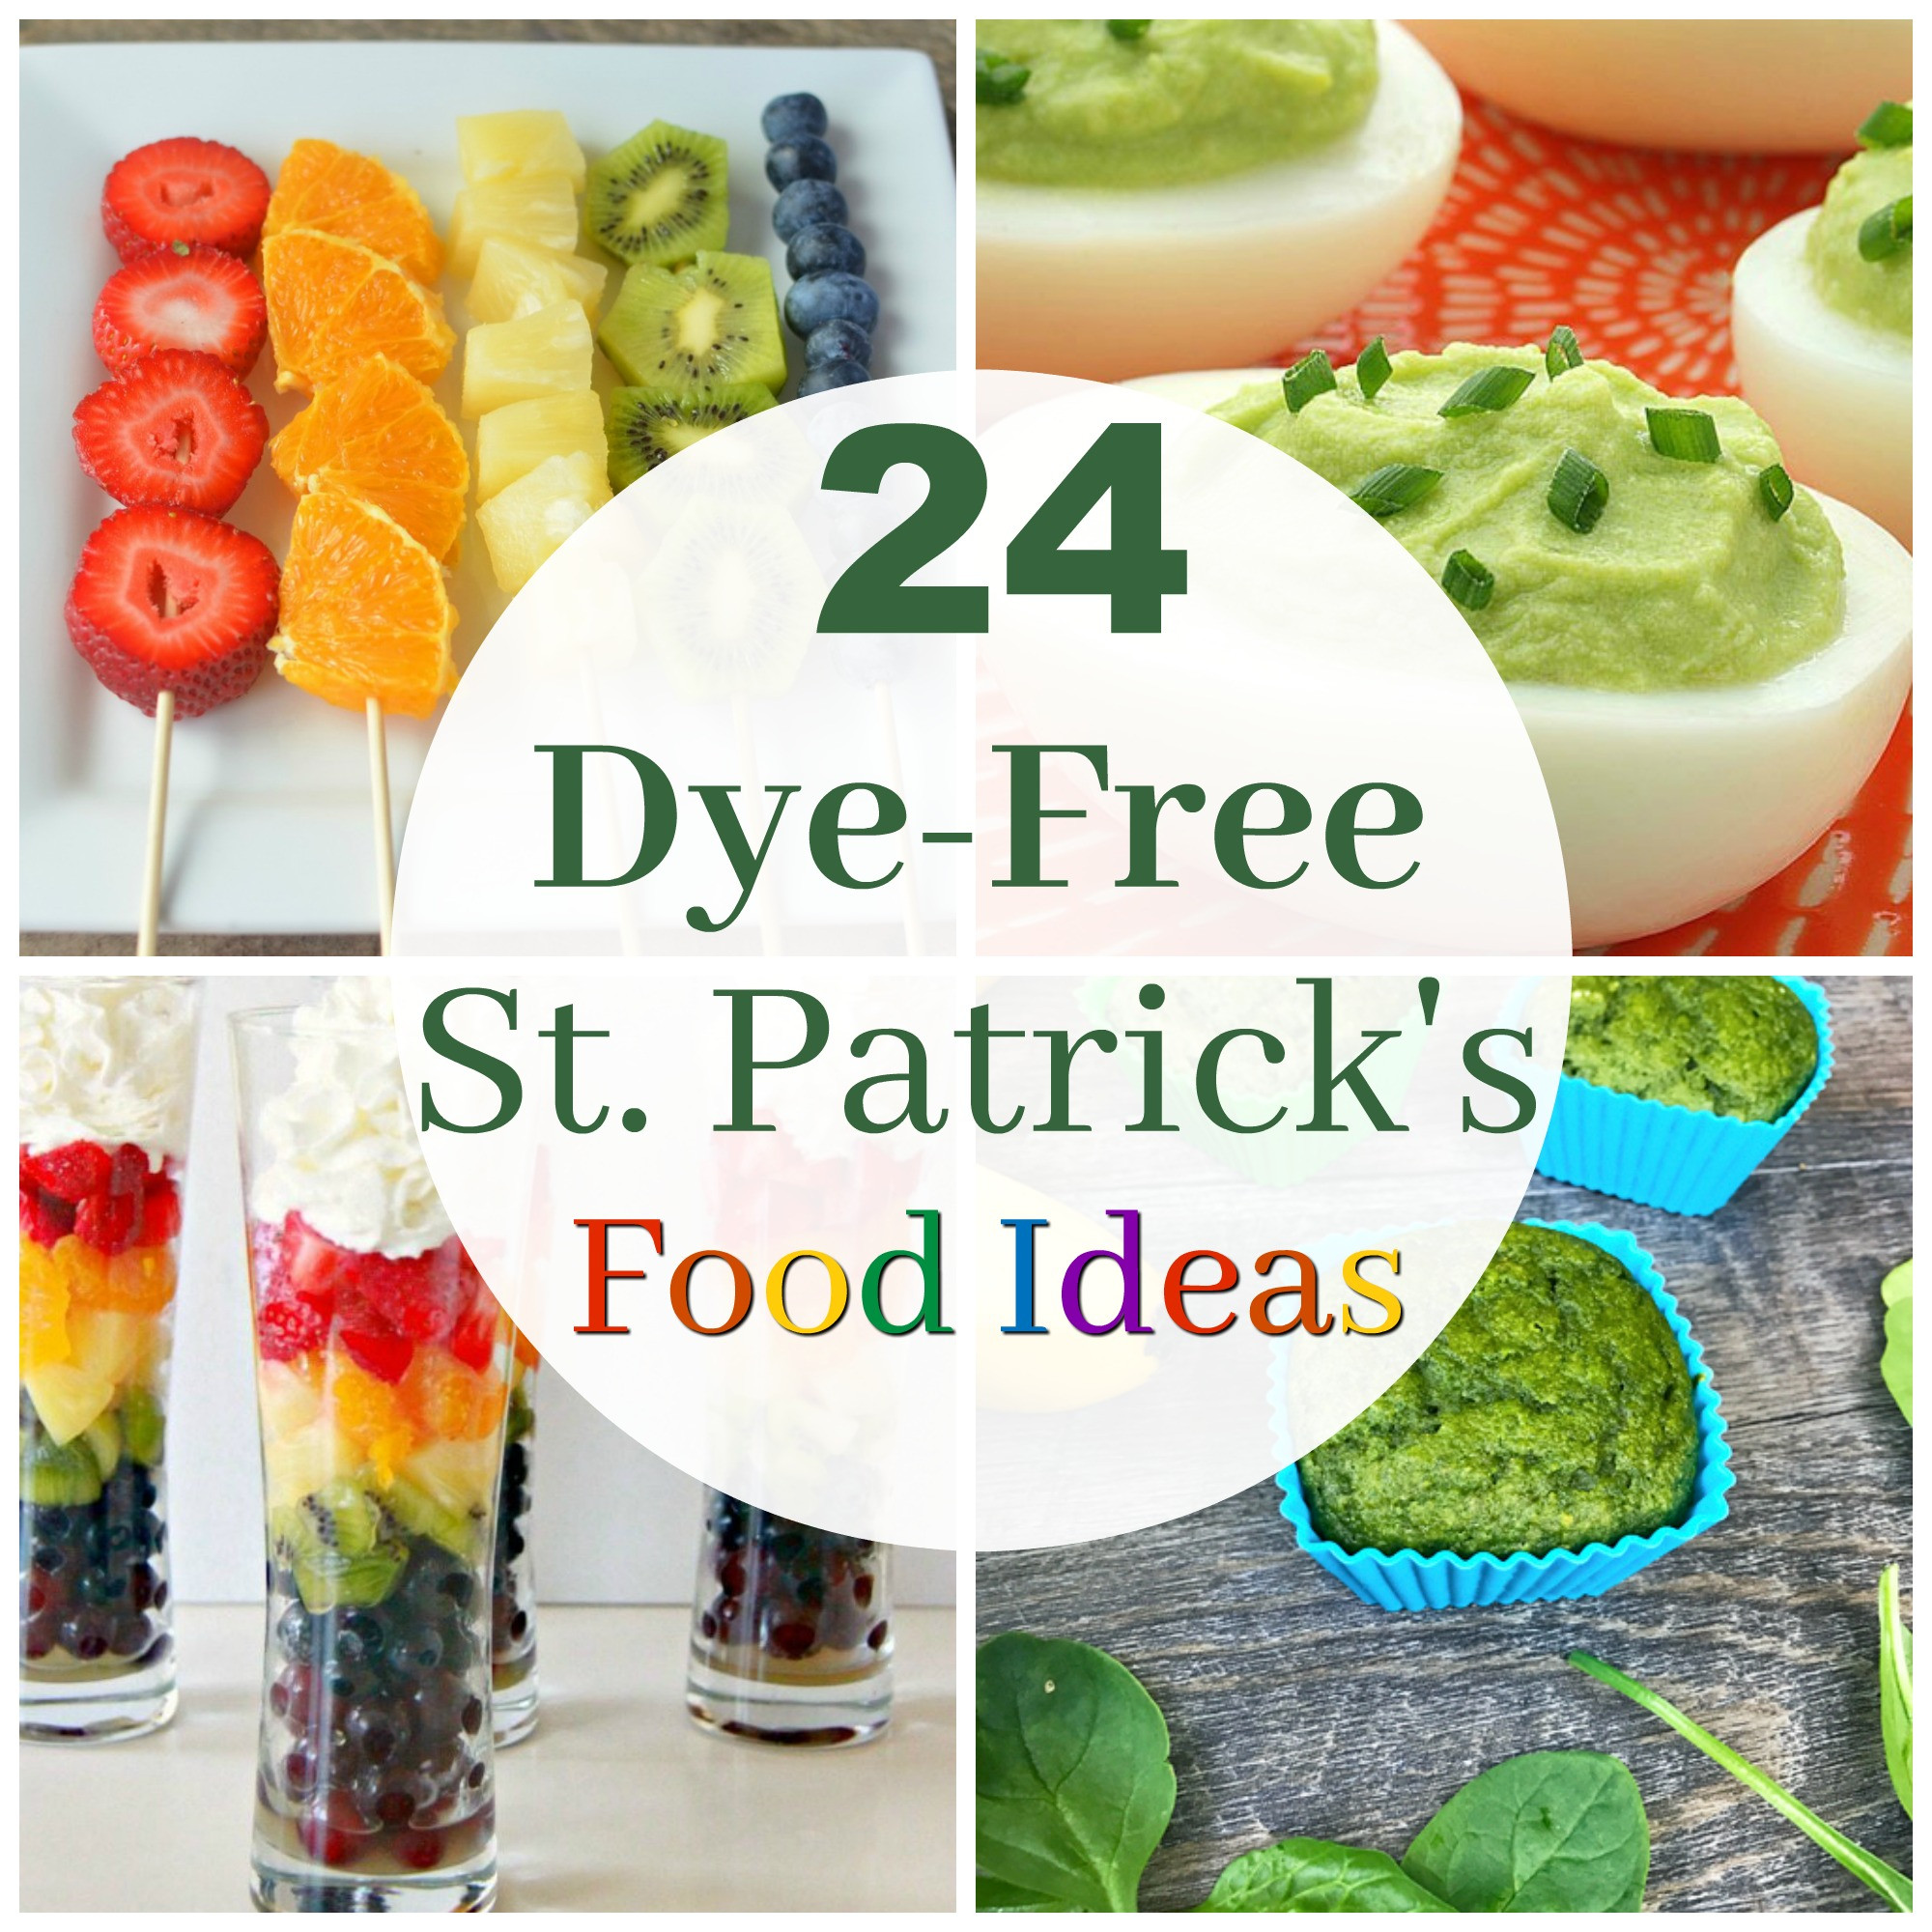 St Patrick's Day Food Ideas
 24 Dye Free Ideas for Fun St Patrick s Day Food